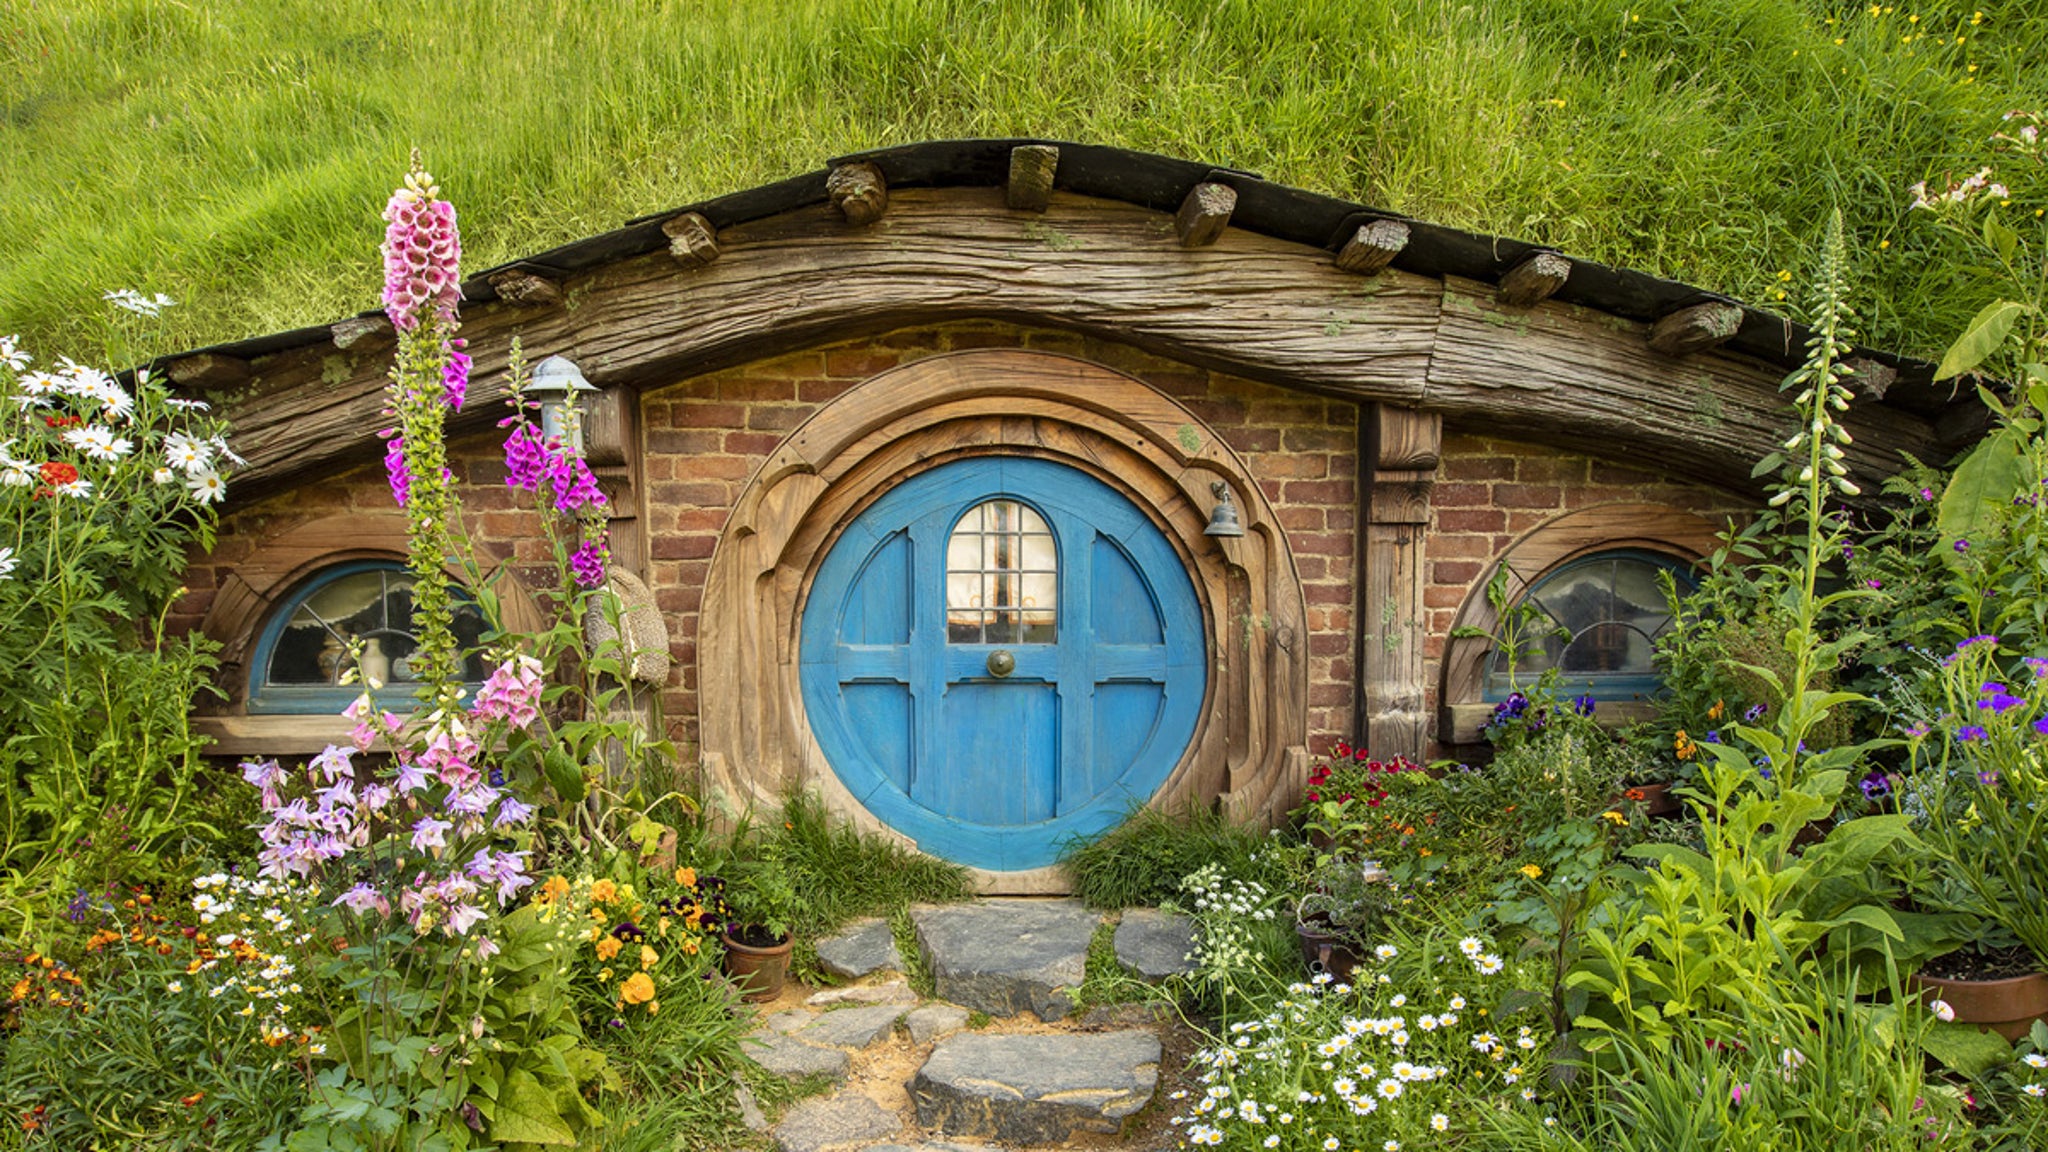 ‘Lord Of The Rings’ Movie Set Listed On Airbnb For 2-Night Stay